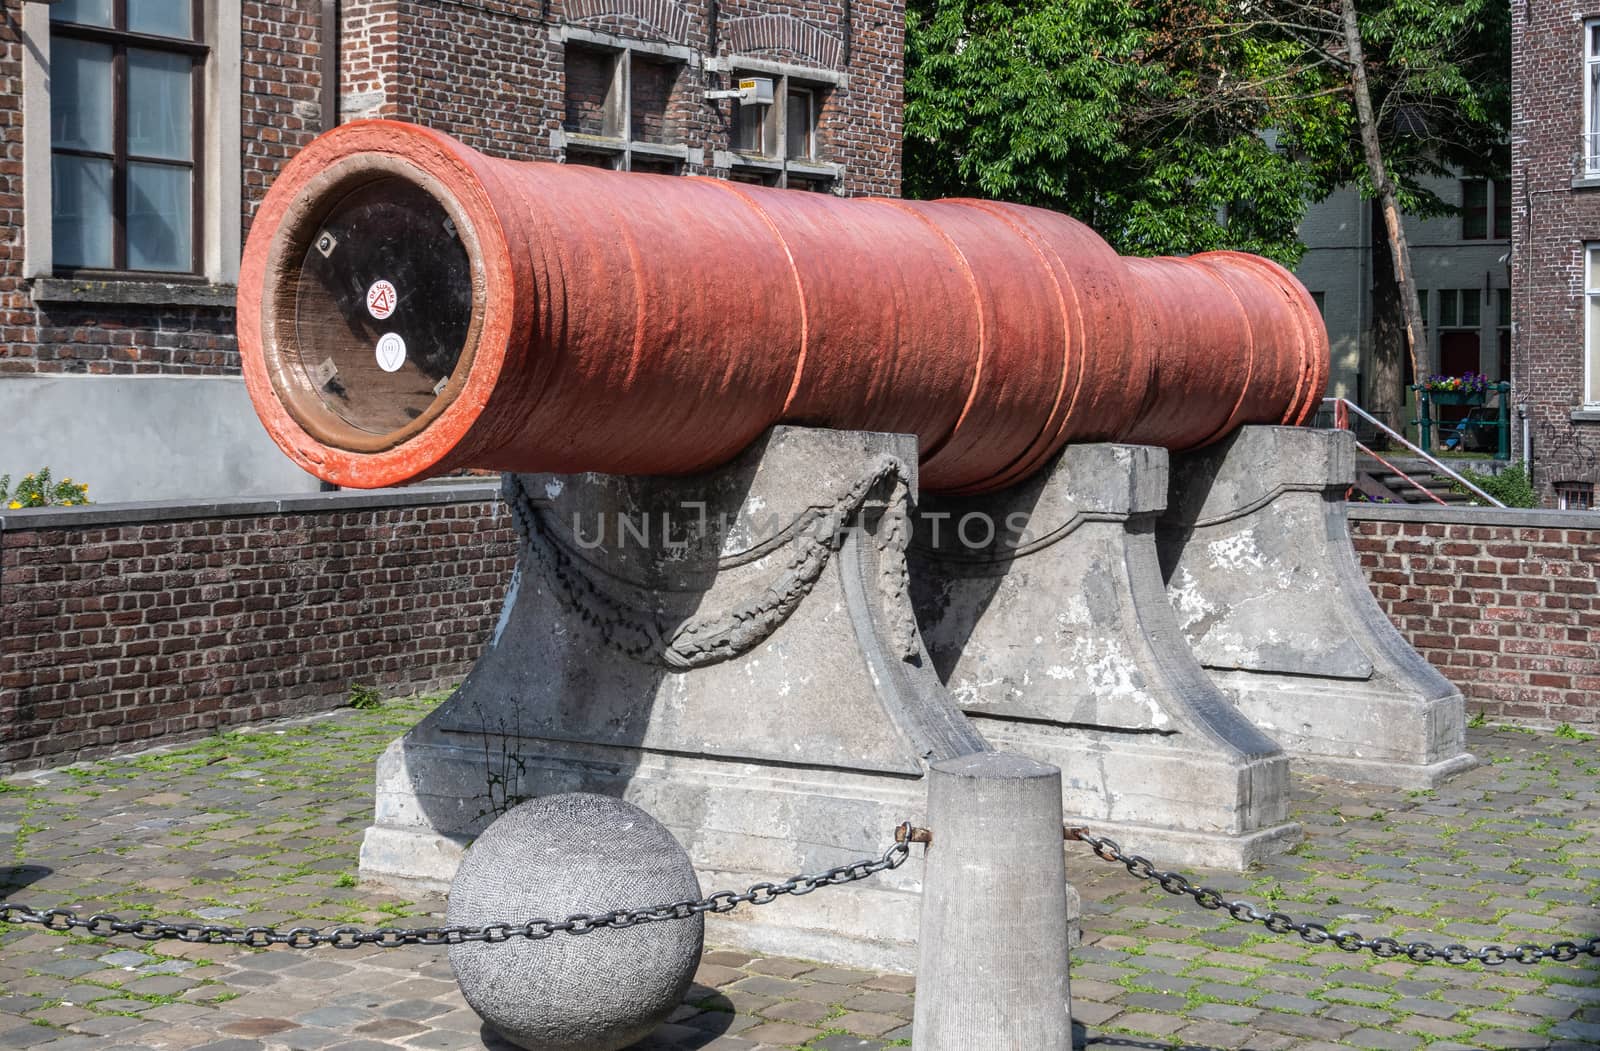 Gent, Flanders, Belgium -  June 21, 2019: Historic large, red, Dulle Griet Cannon with stone cannon ball. Brick wall with window and green foliage as background.